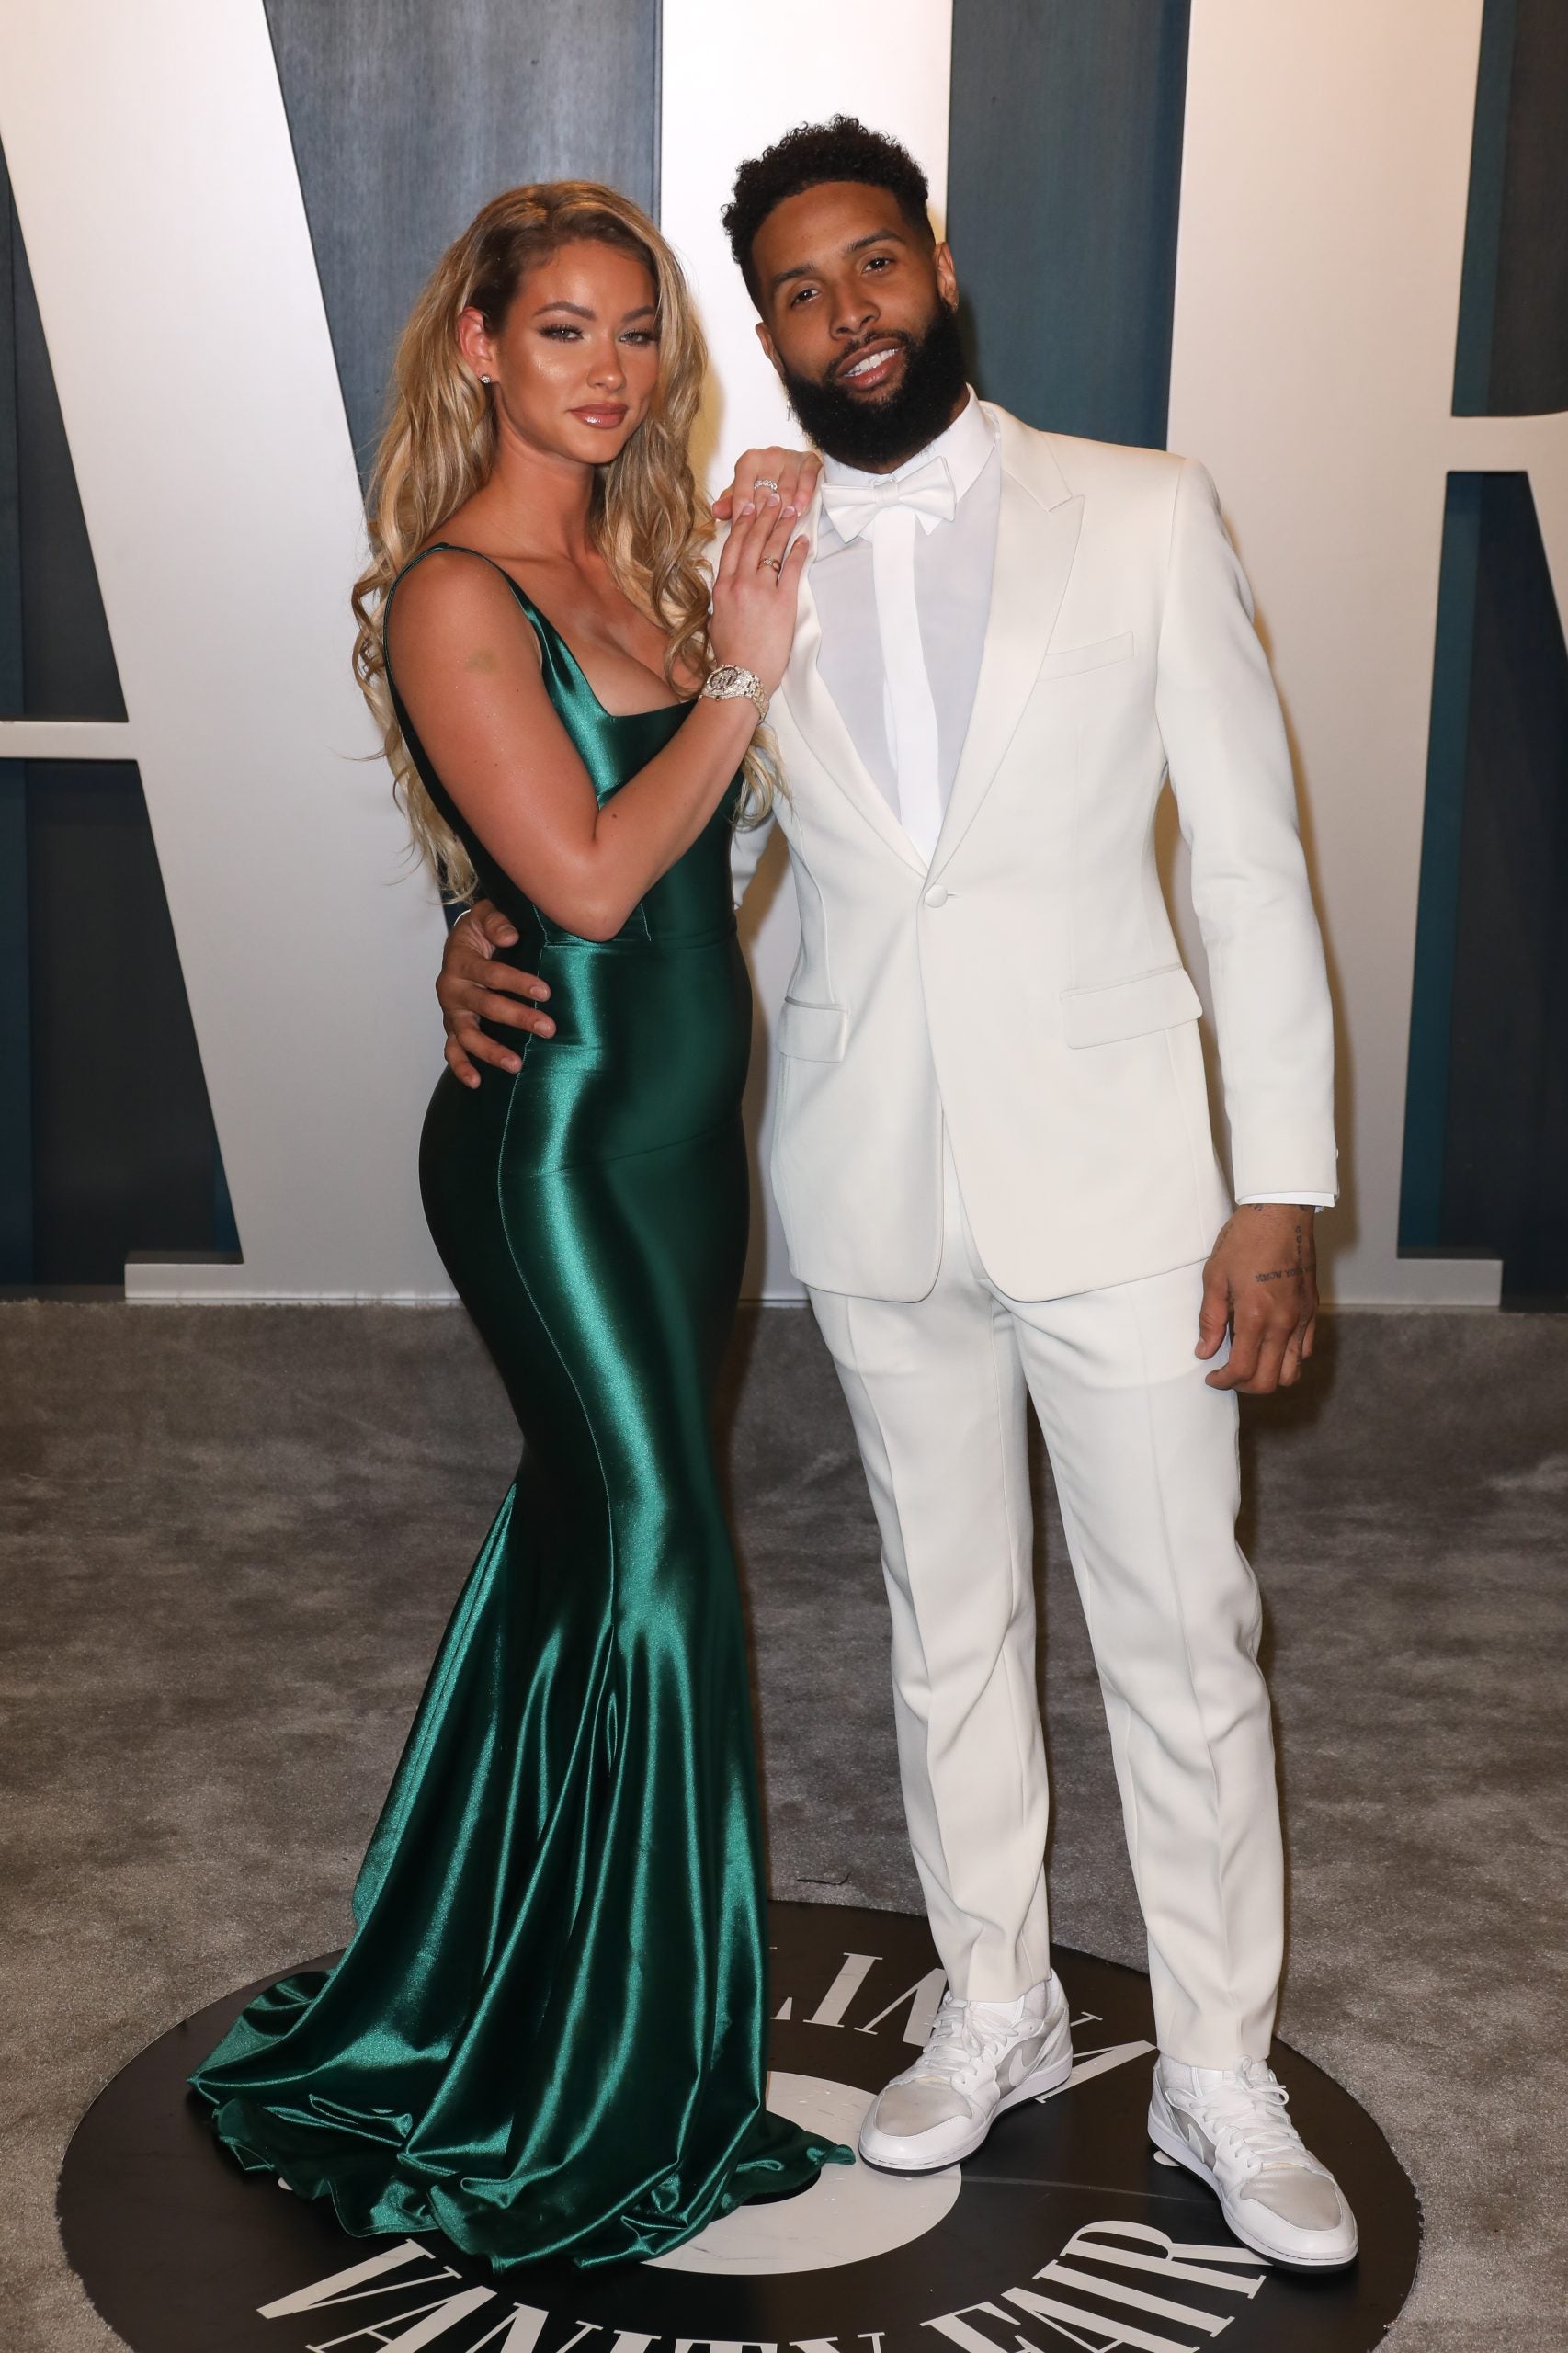 Odell Beckham Jr. And Girlfriend Lauren Wood Expecting First Child Together